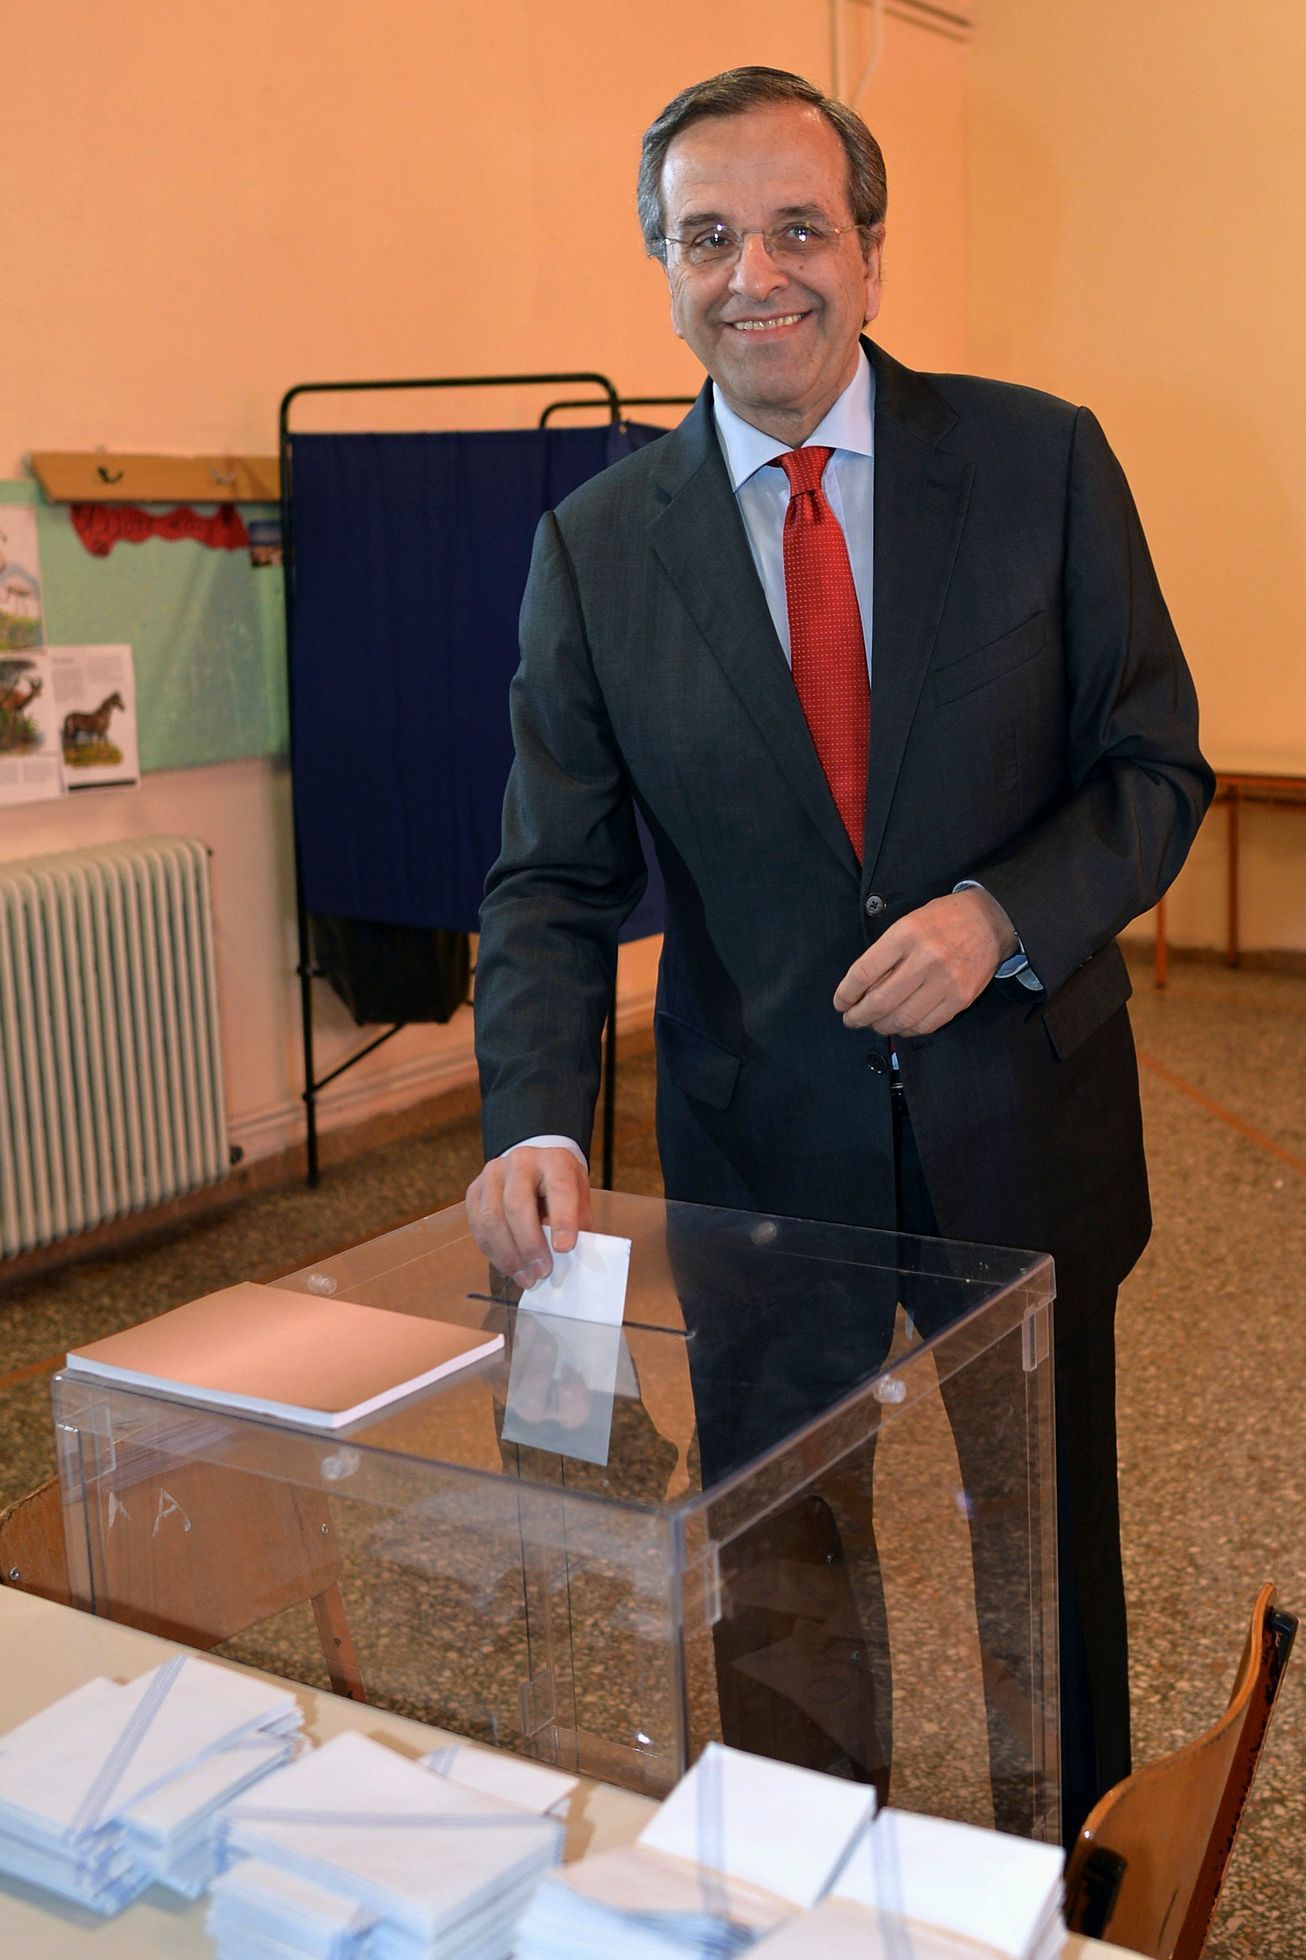 Greece's PM and leader of the conservative New Democracy party Samaras prepares to cast his ballot at a polling station in Pilos in southern Greece